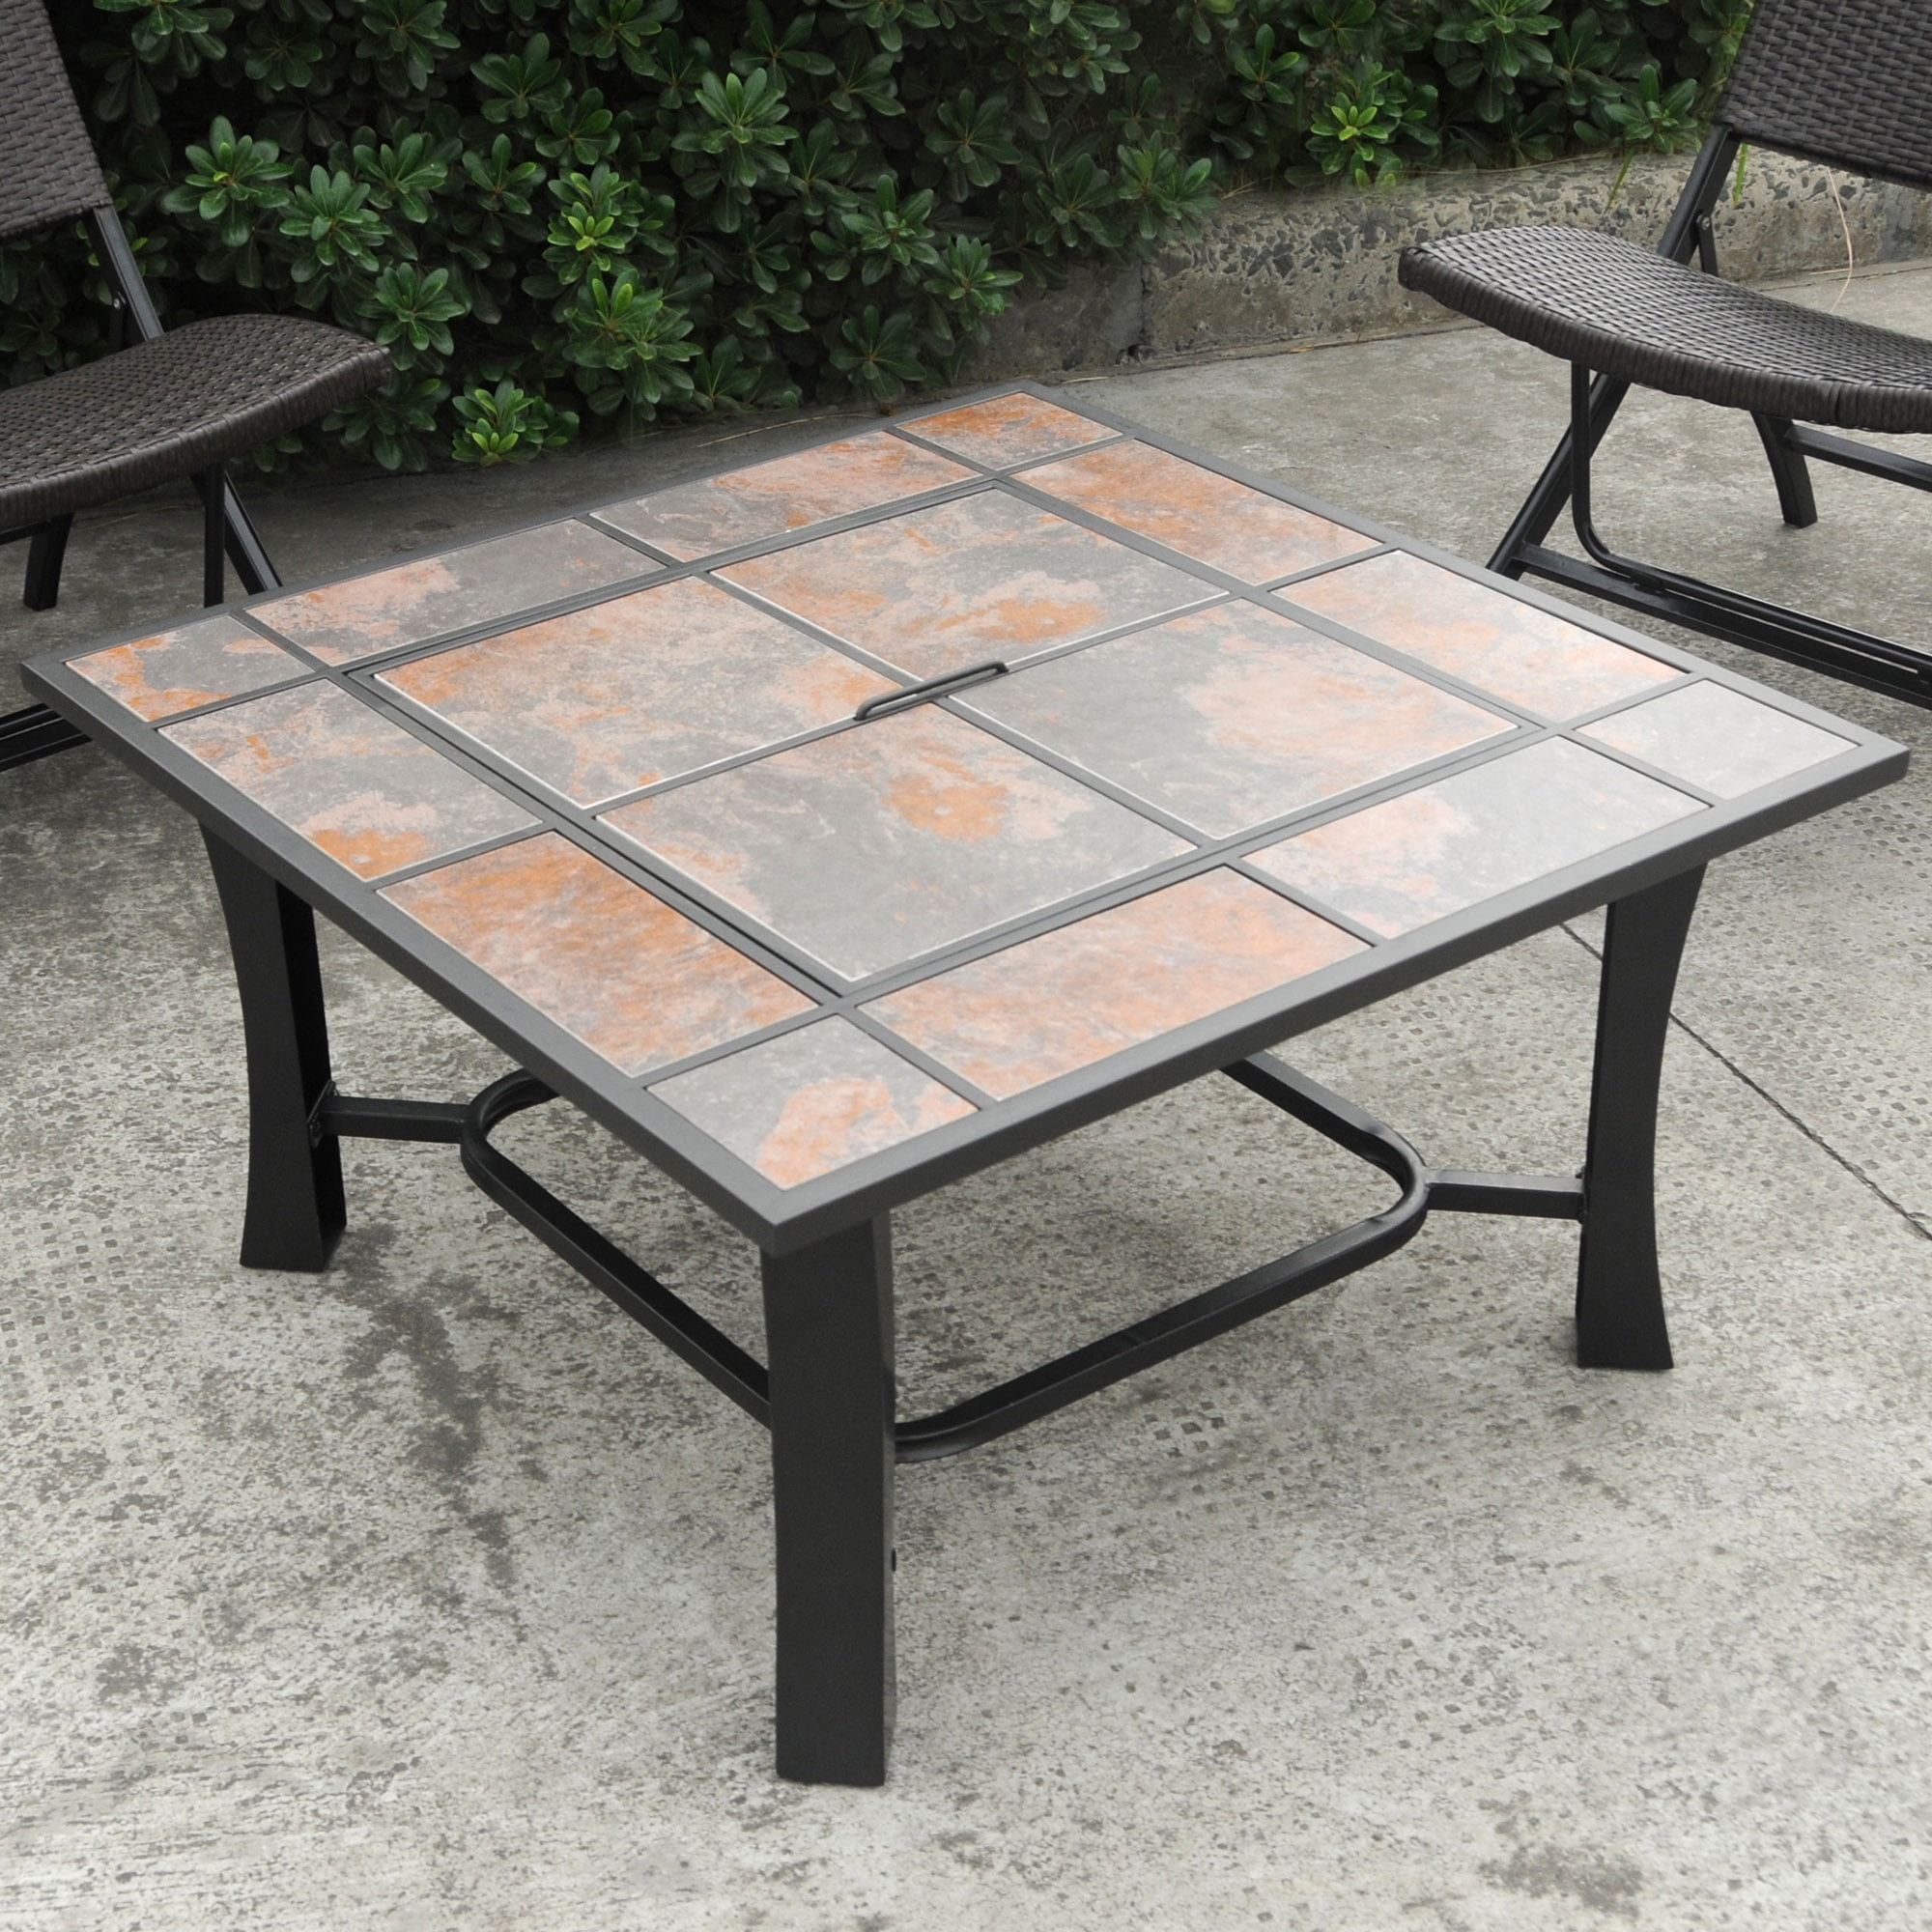 Coffee Table Wood Burning Fire Bowl, Fire Pit Replacement Tiles